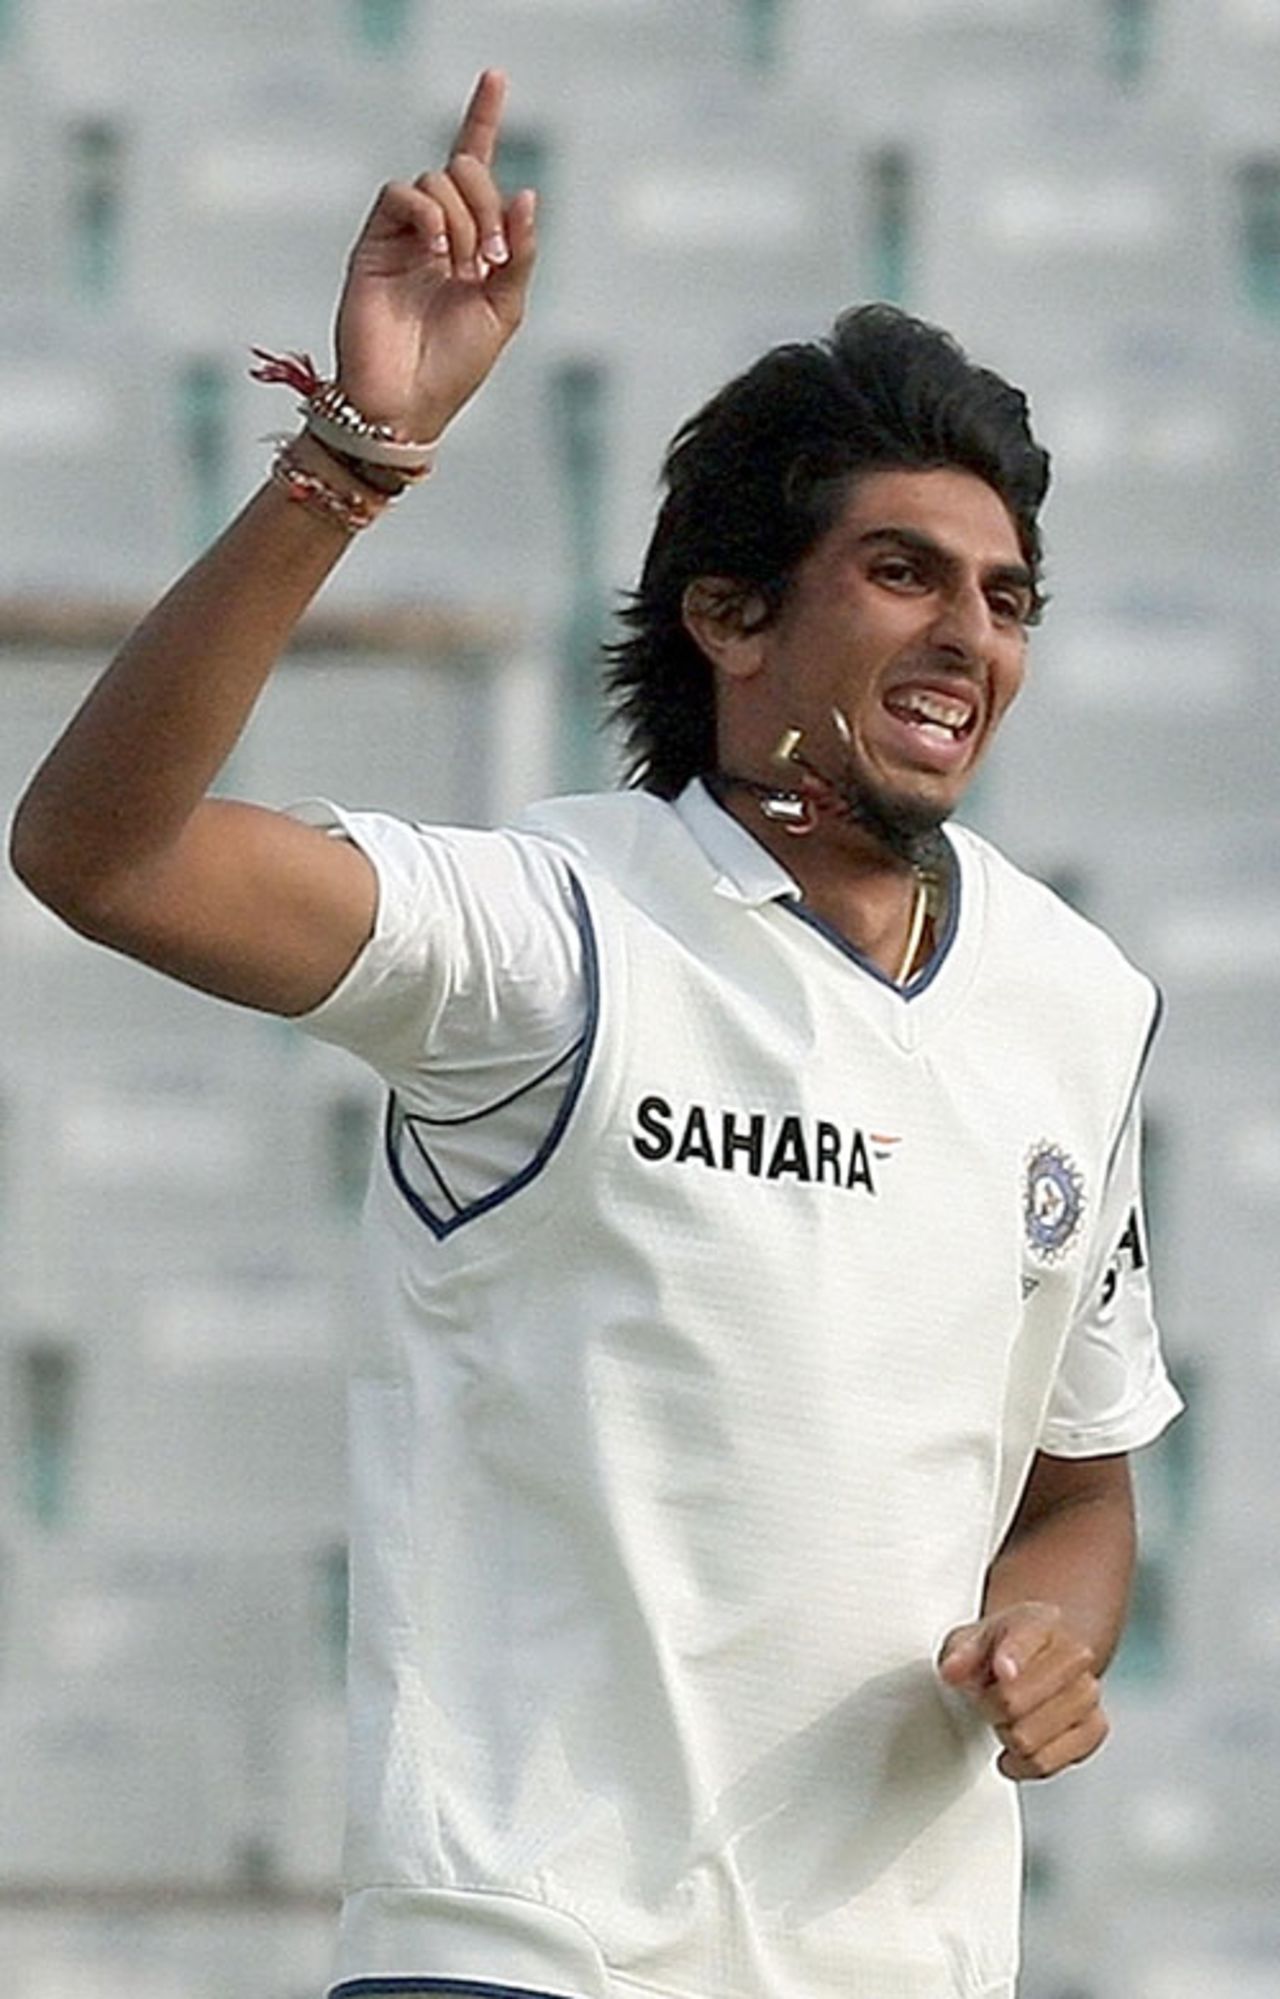 Ishant Sharma relishes bowling Ian Bell, India v England, 2nd Test, Mohali, 3rd day, December 21, 2008